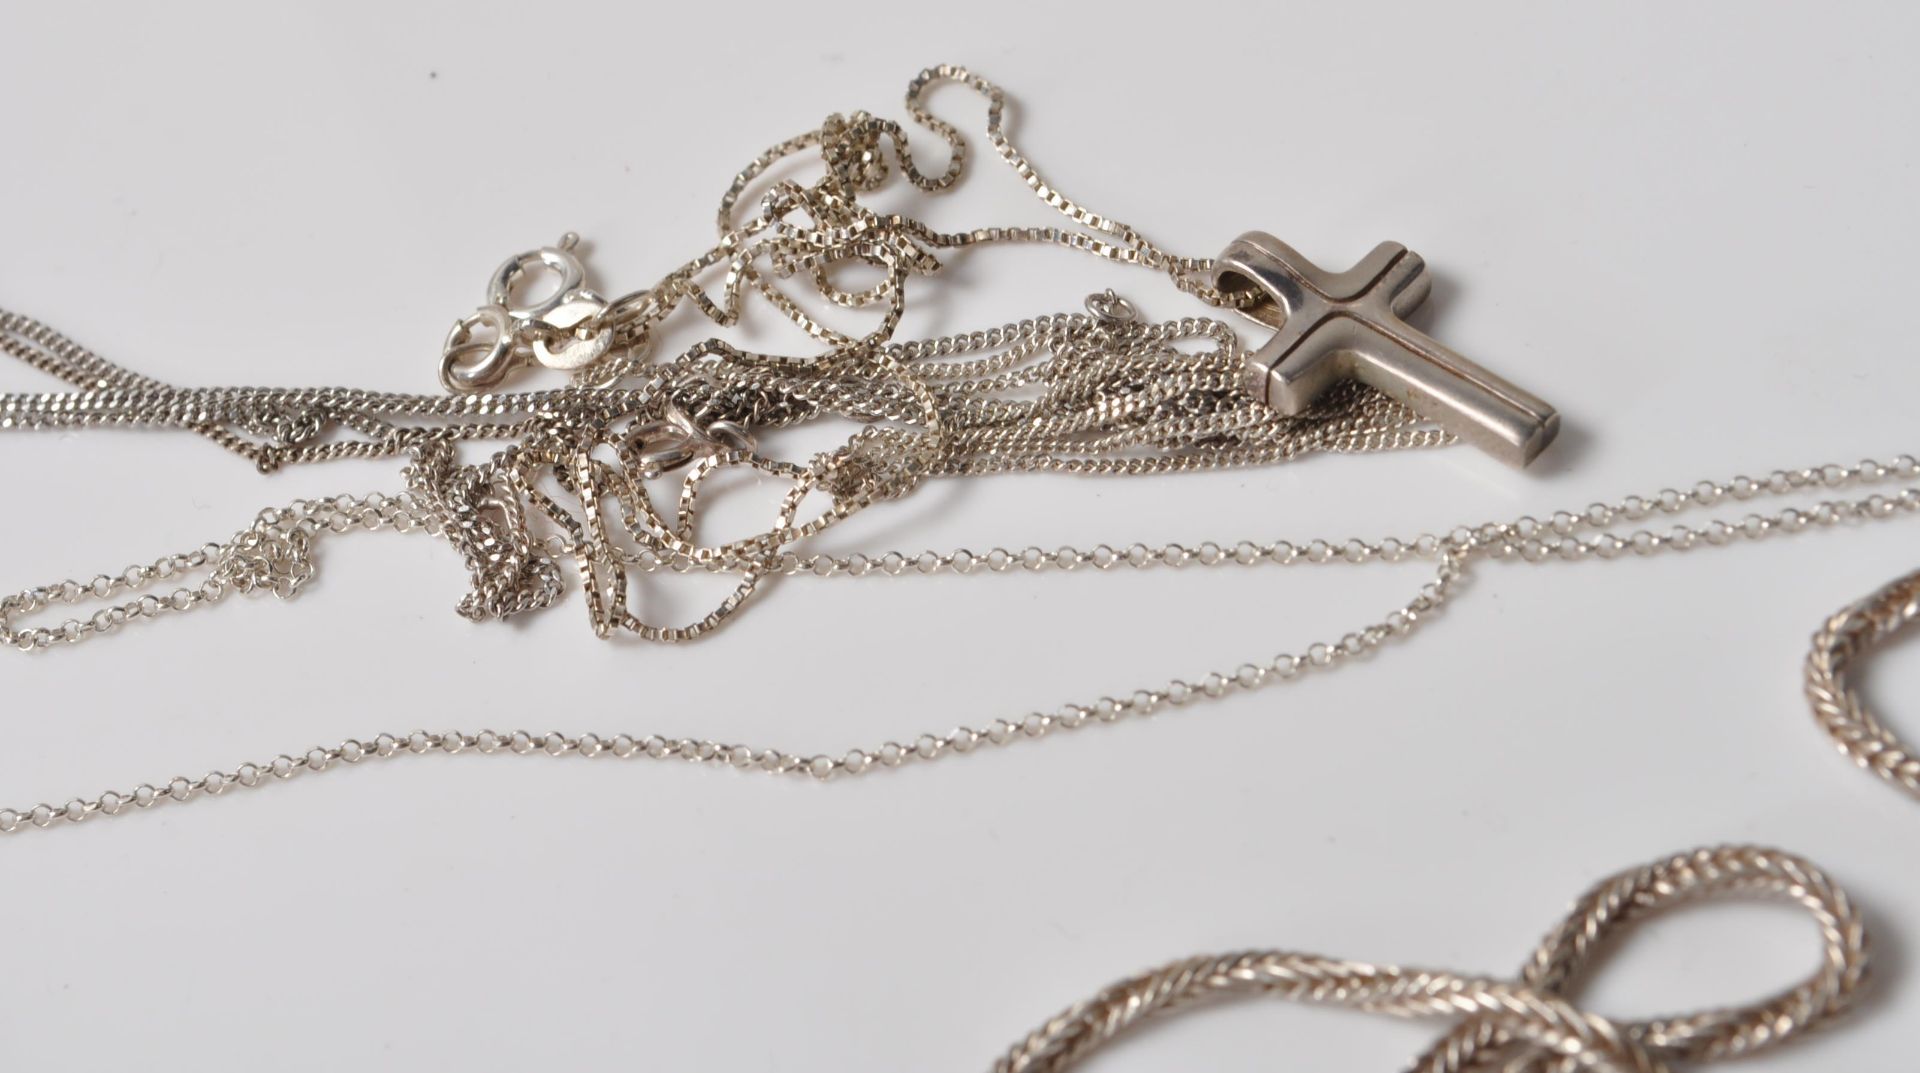 COLLECTION OF STAMPED 925 SILVER CHAIN NECKLACES AND PENDANTS. - Image 8 of 12